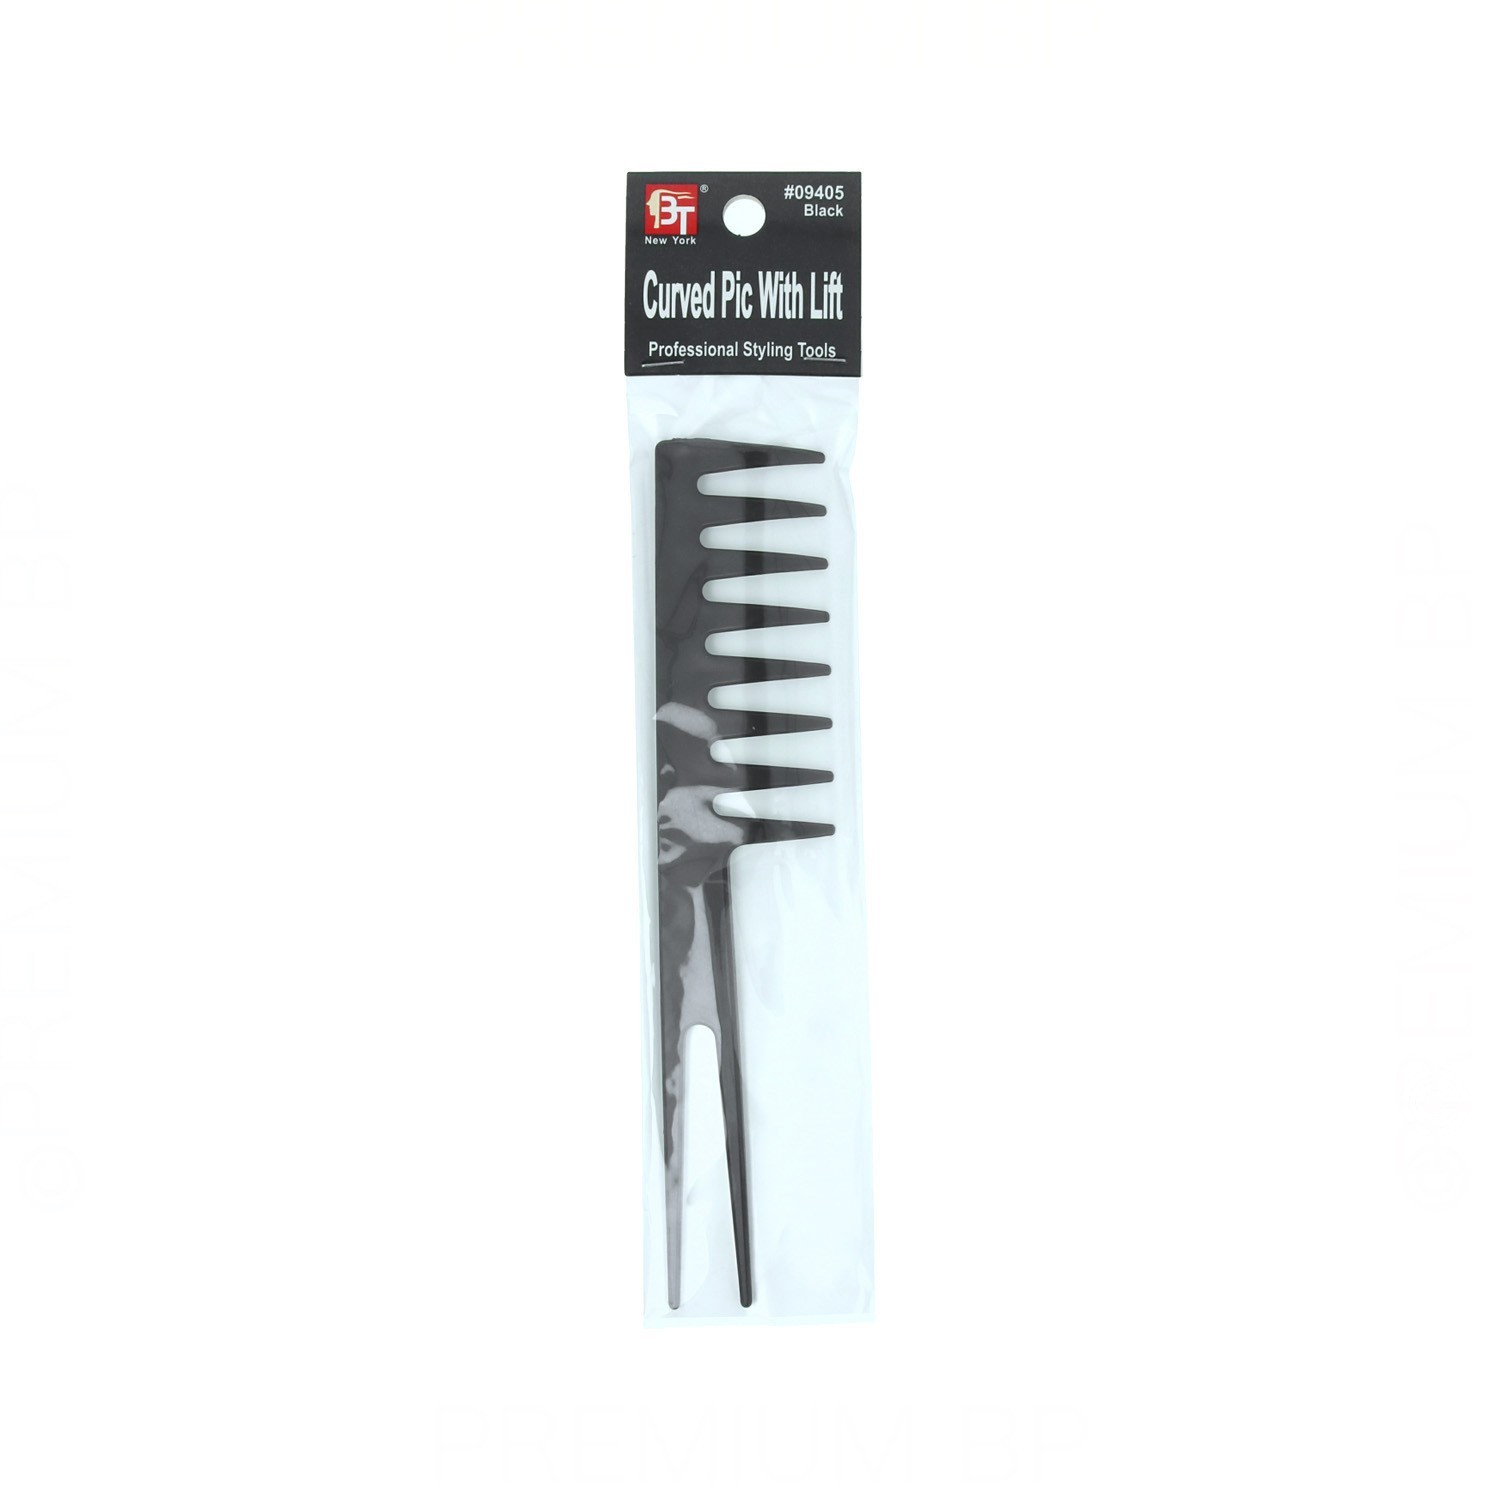 Beauty Town Hair Comb Professional Curved Pic With Lift Black (09405)